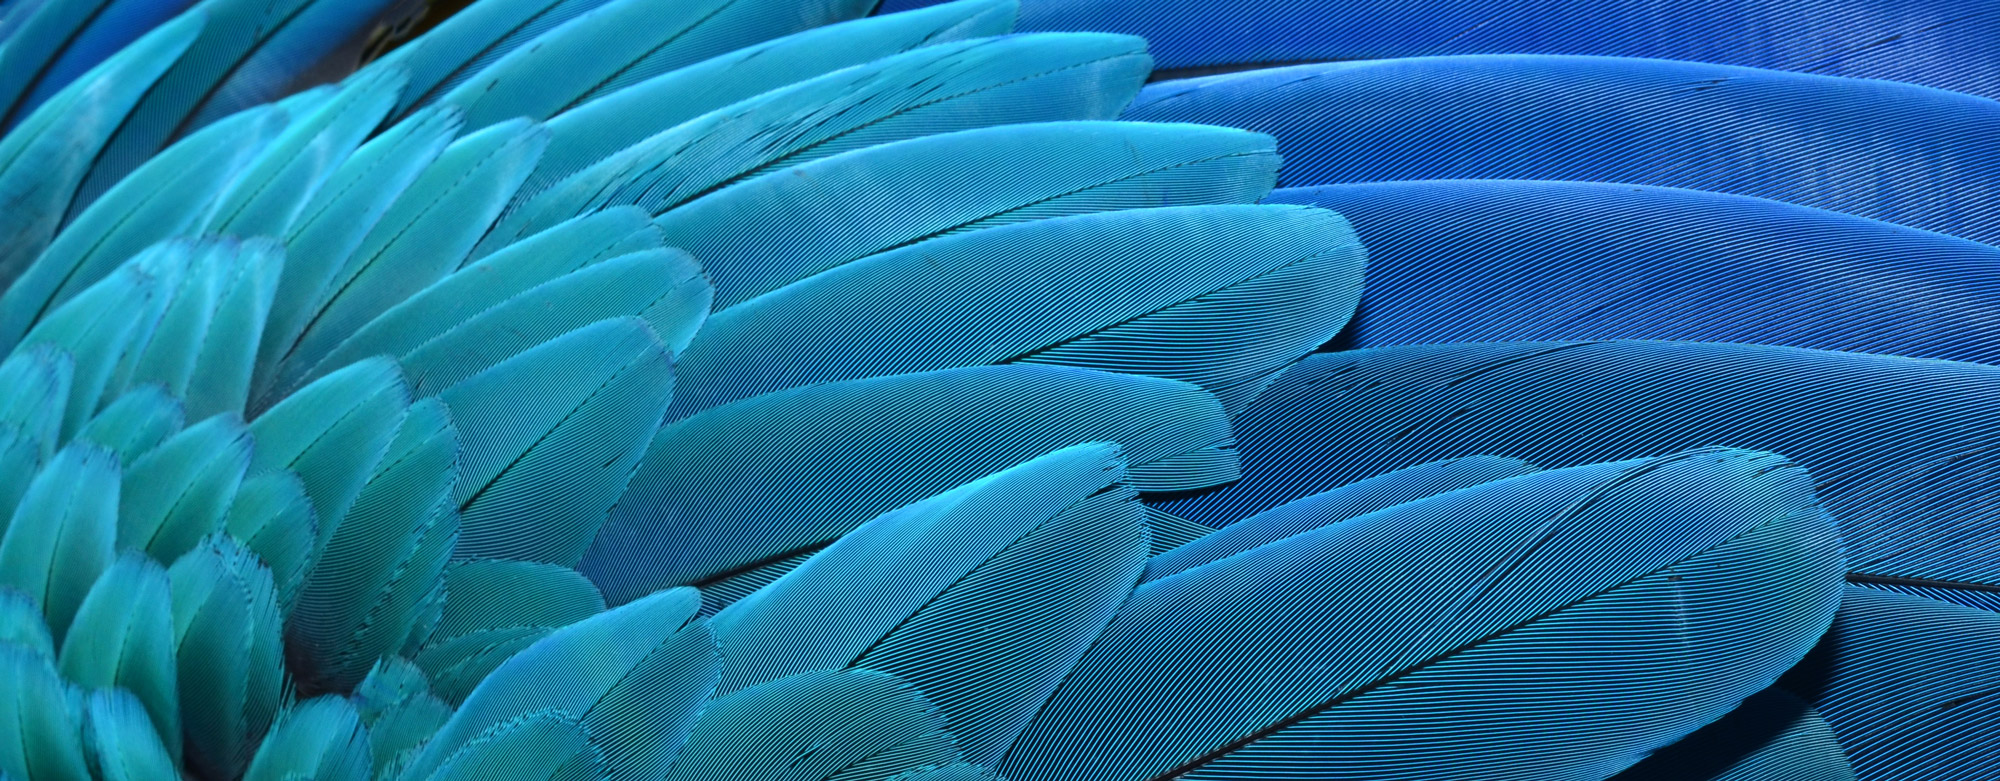 A close-cropped image of teal bird feathers fading into blue.